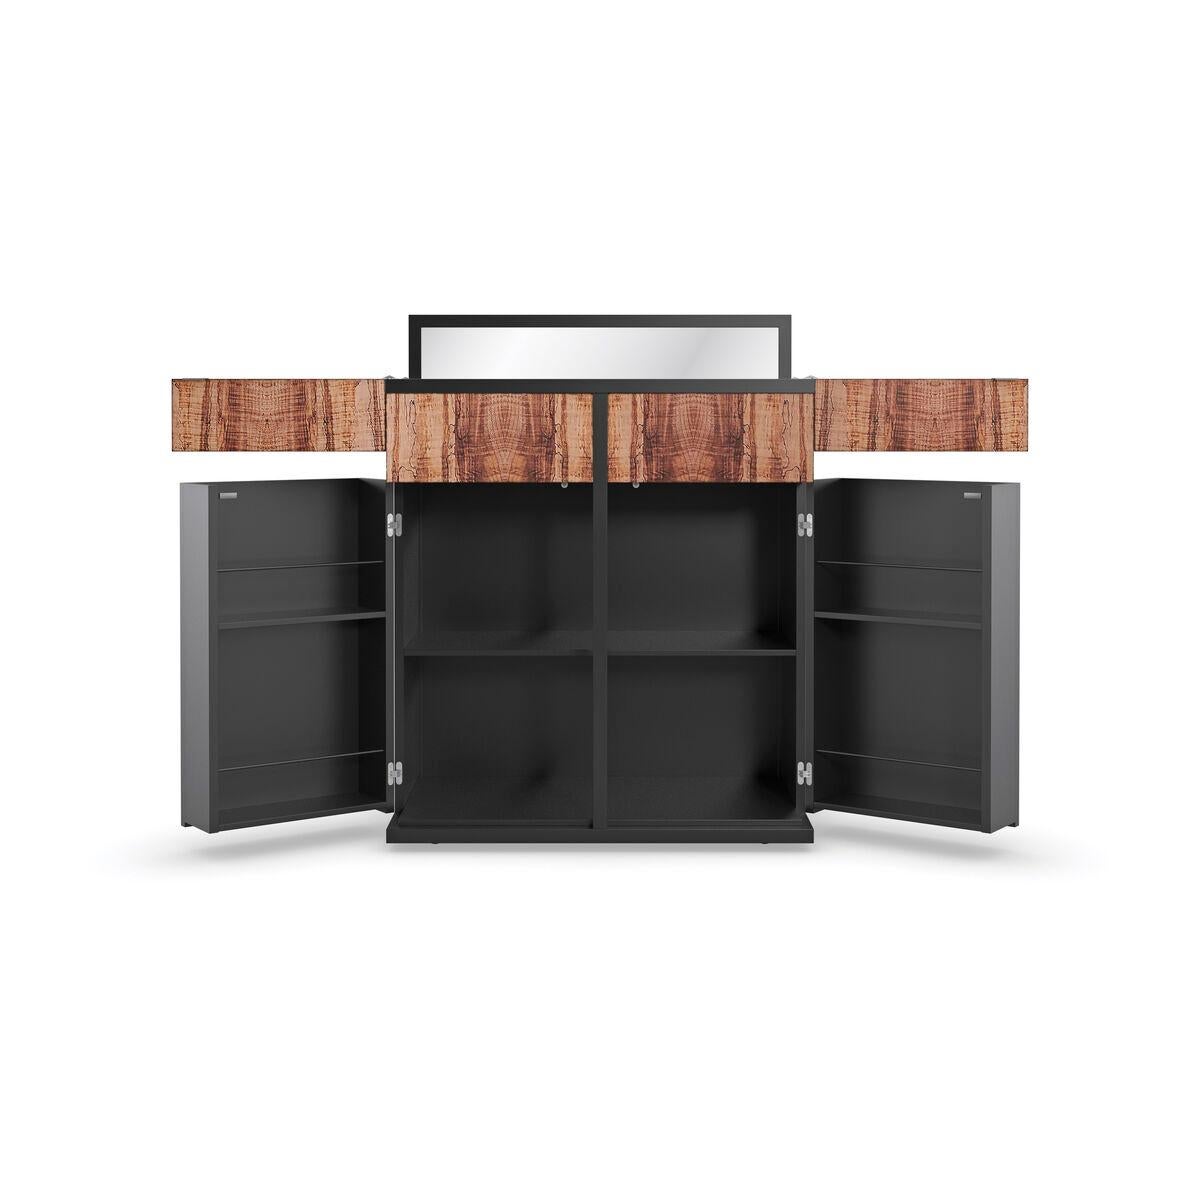 Maple Modern bar cabinet, luxury, understated: this sleek bar cabinet mixes form and function with innovation to elevate entertaining. Well-suited for compact spaces or larger living interiors, its clean-lined design accentuates the natural beauty